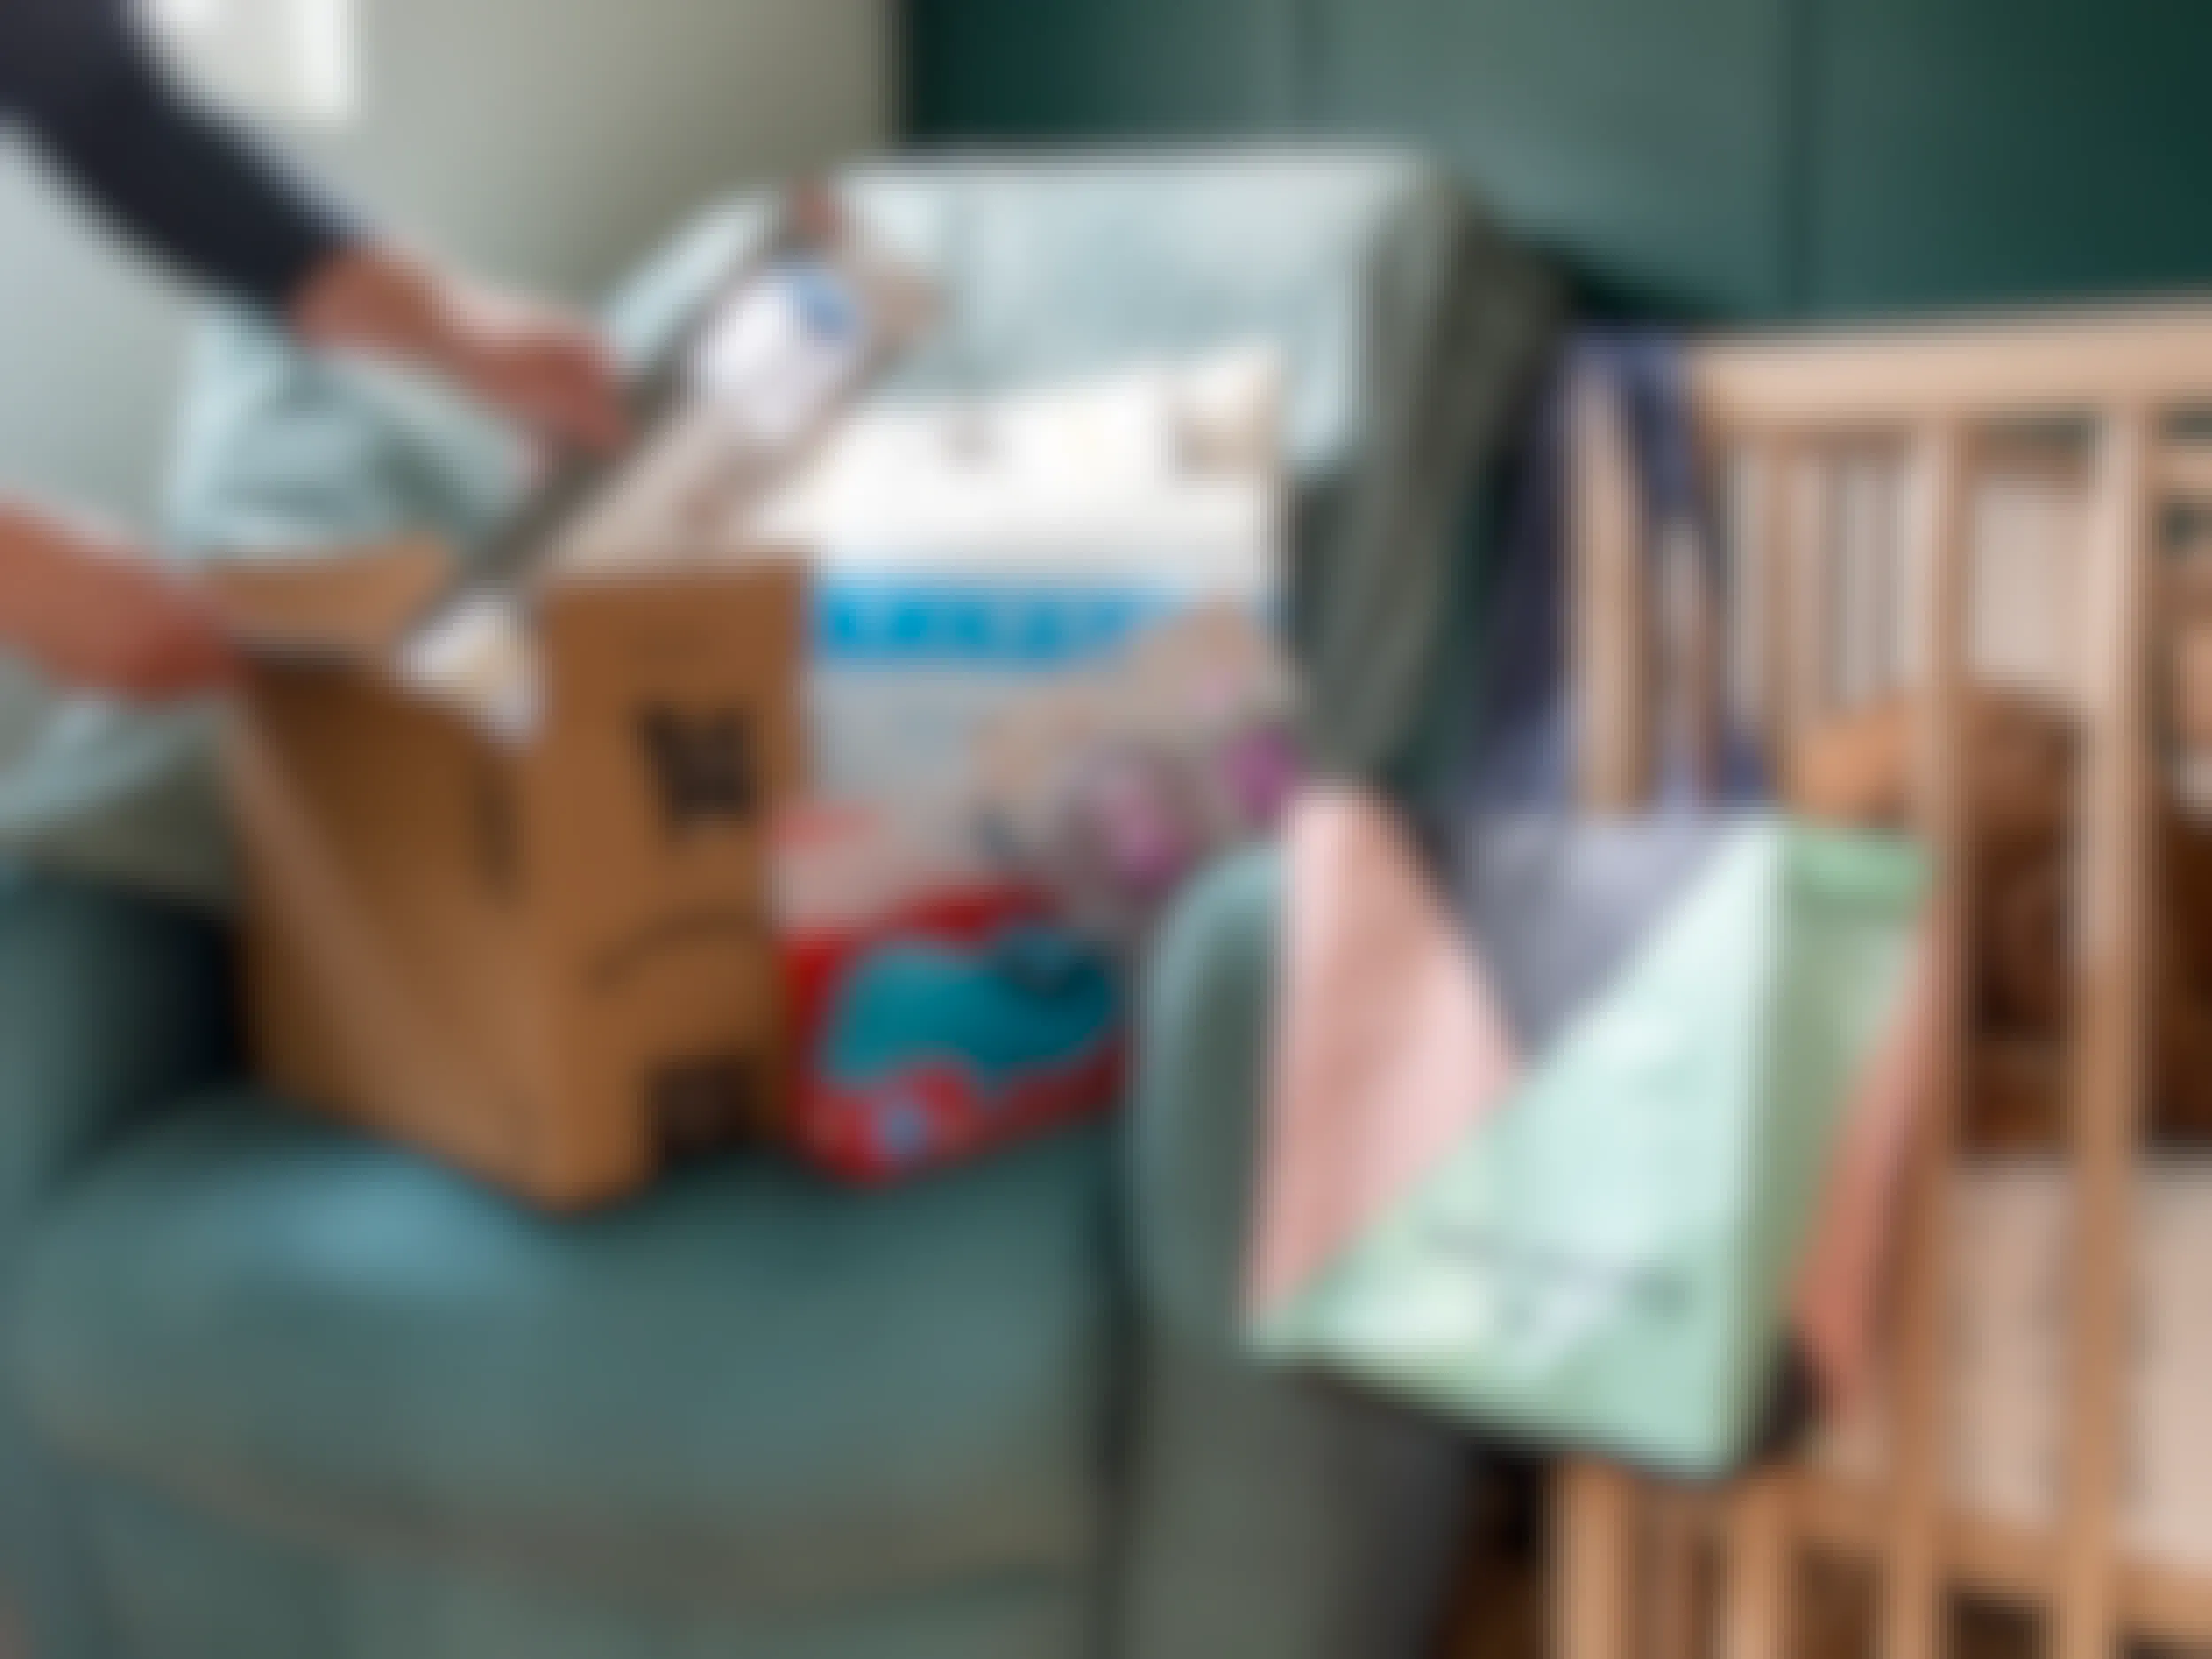 A person pulling baby products out of an amazon box. An amazon welcome bag is hanging on a crib near by